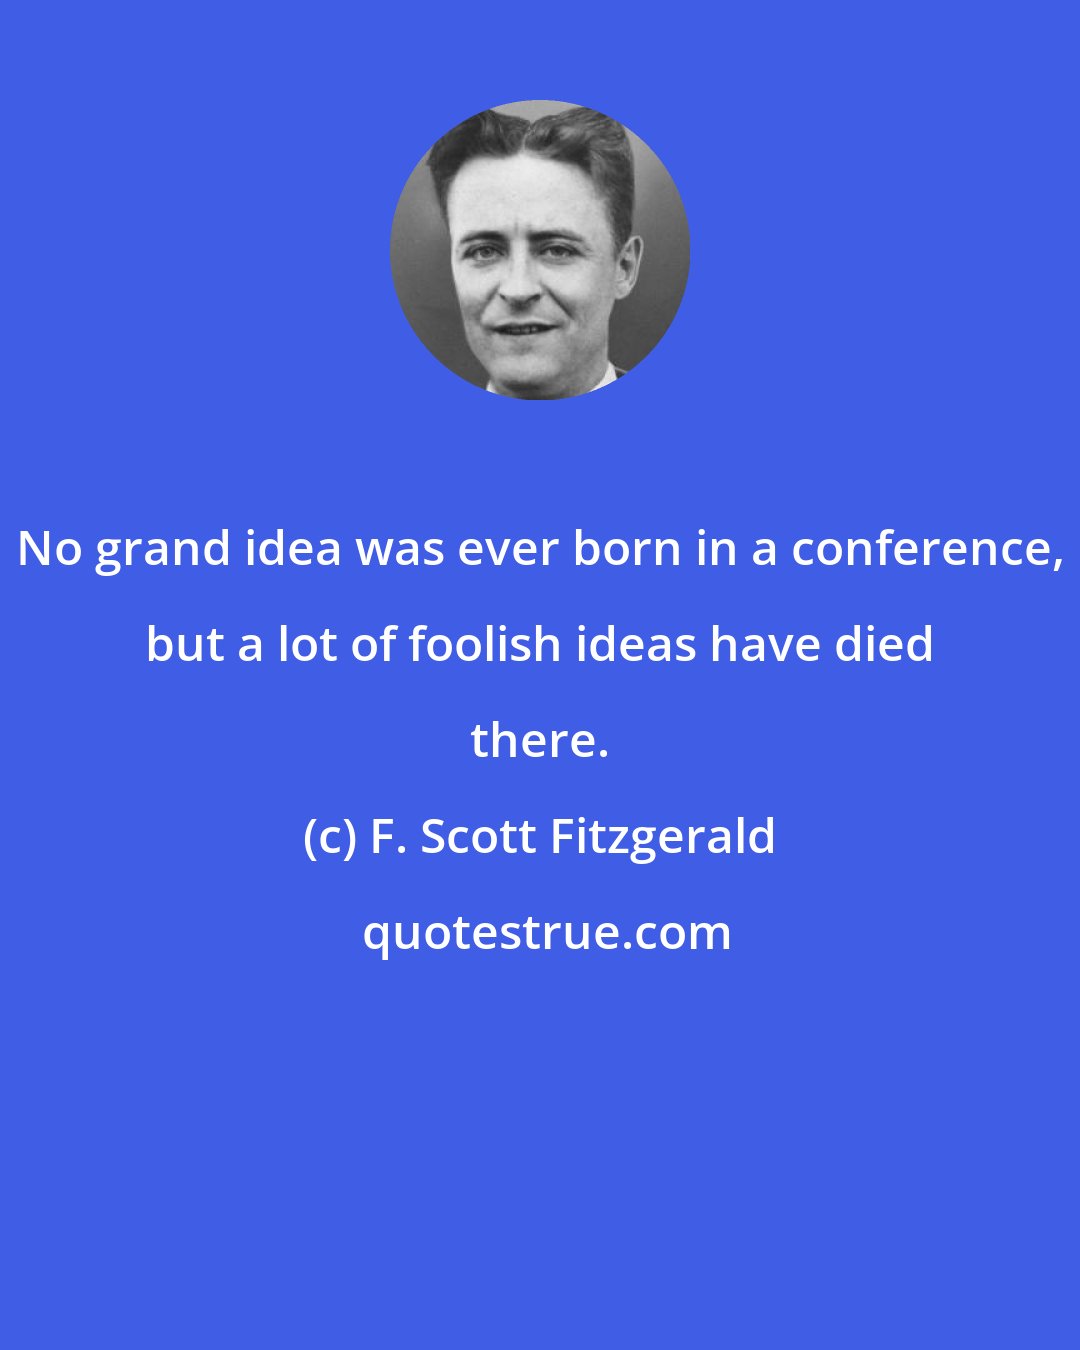 F. Scott Fitzgerald: No grand idea was ever born in a conference, but a lot of foolish ideas have died there.